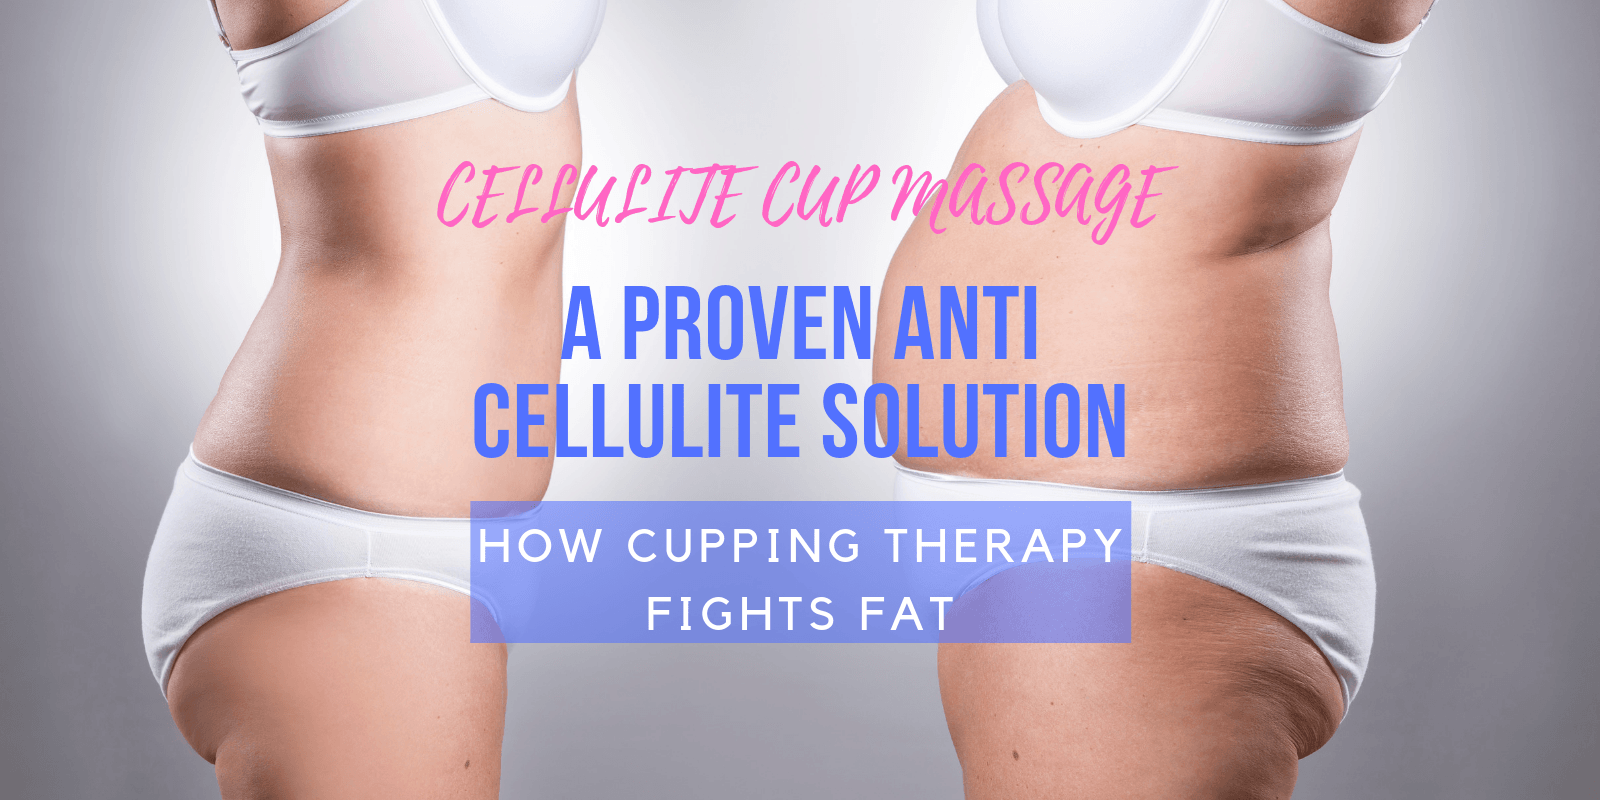 Can Massage for Cellulite Really Help?